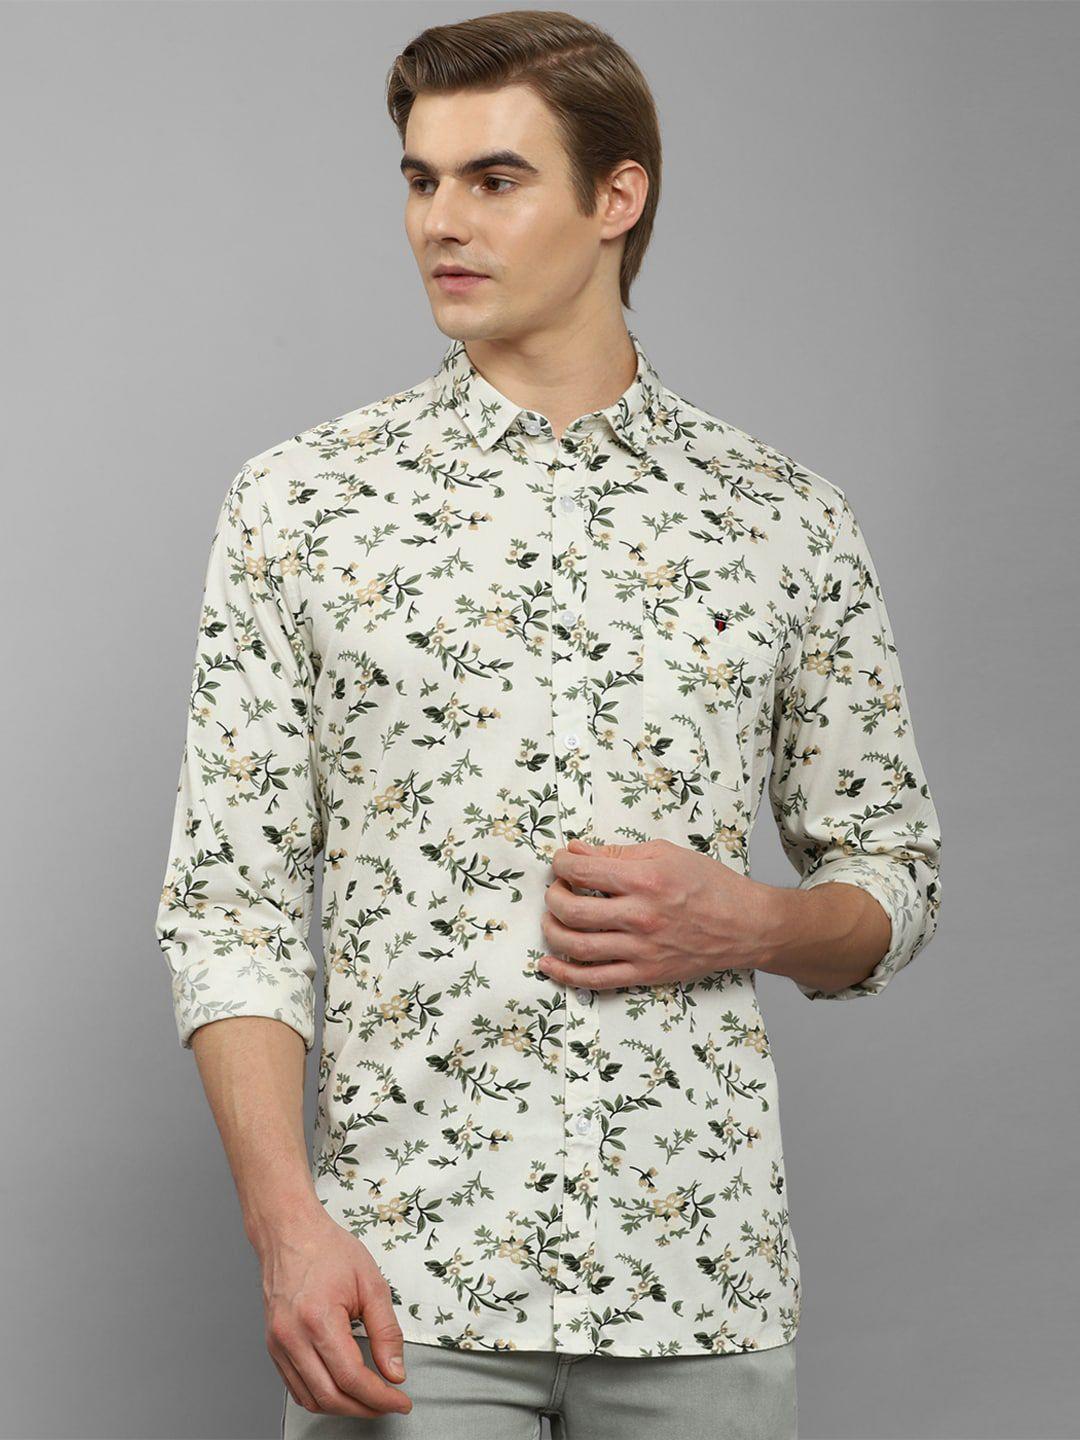 louis philippe jeans slim fit floral printed pure cotton casual shirt